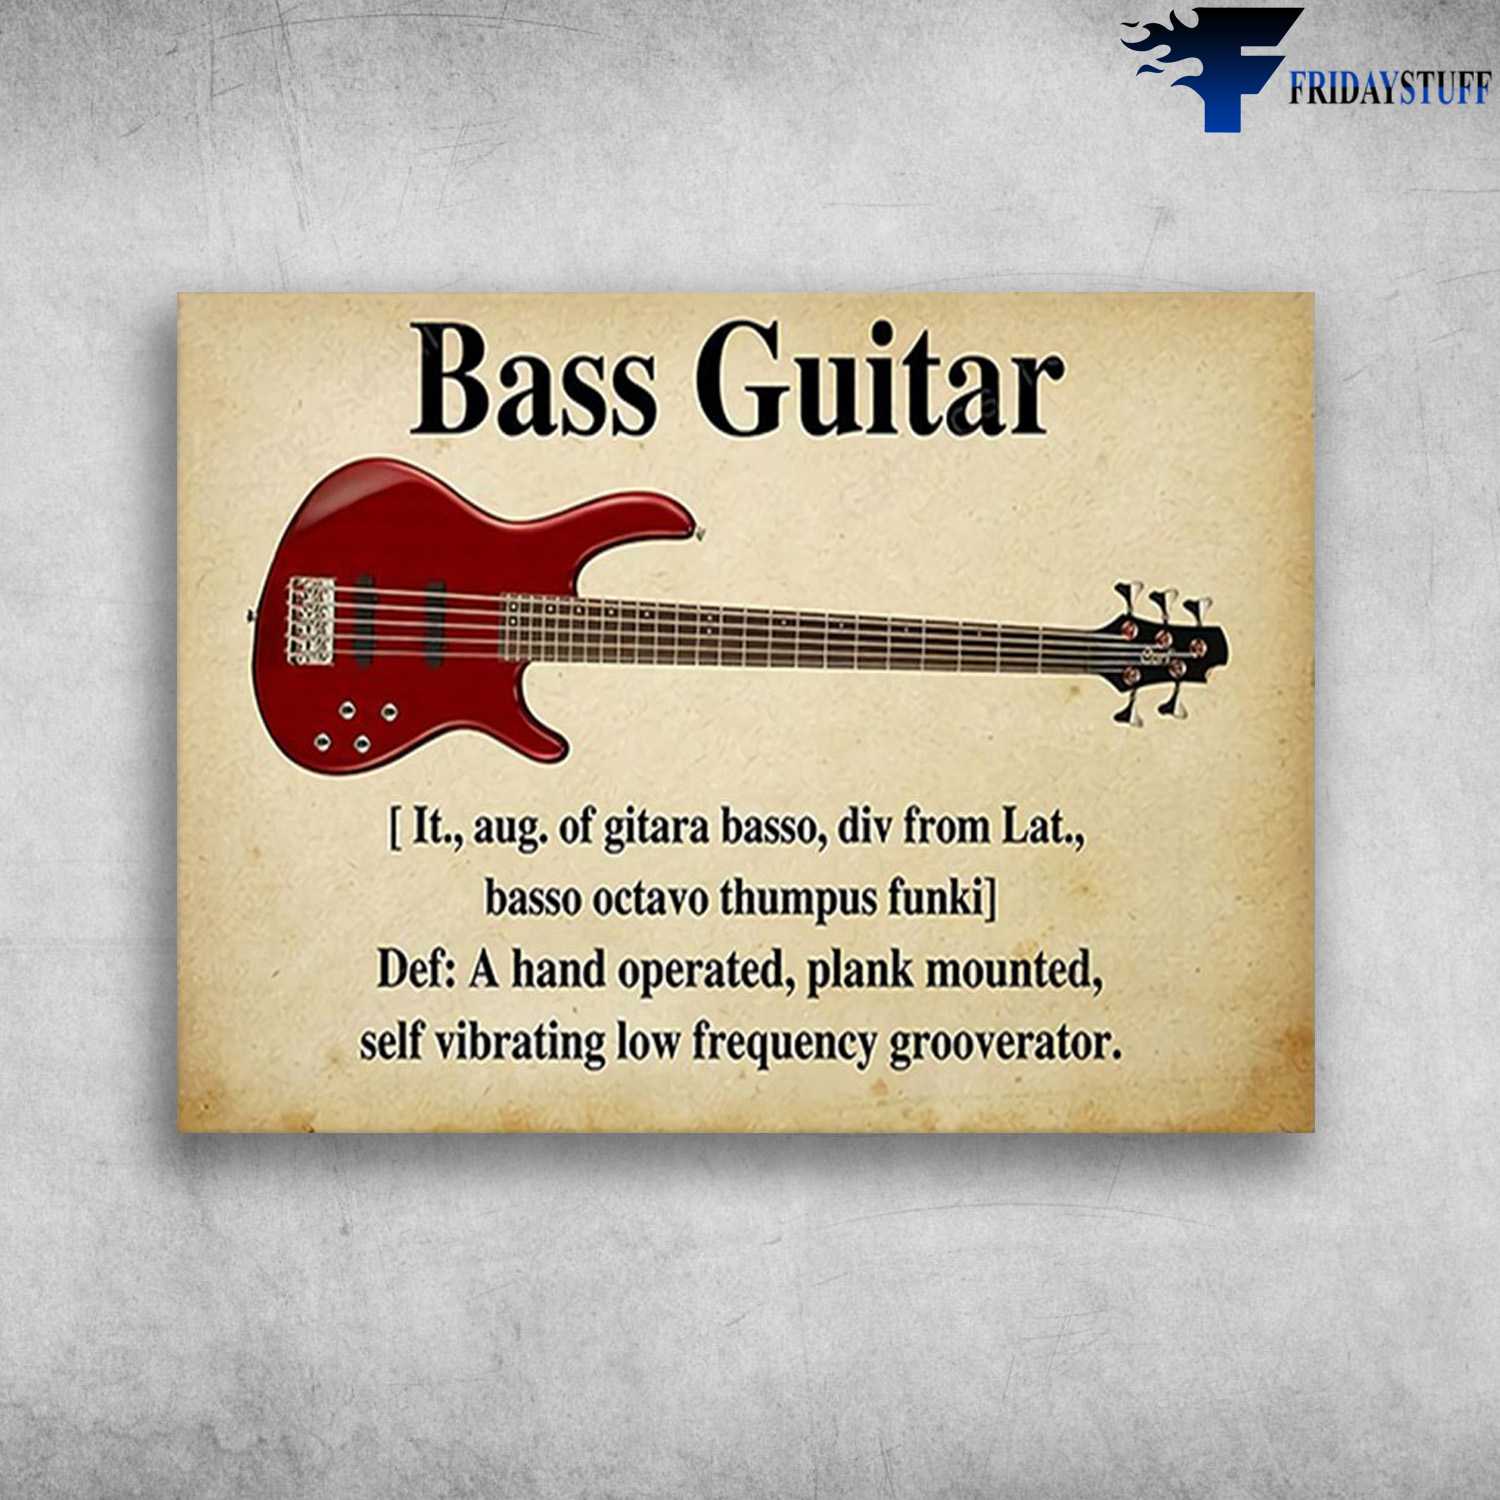 Bass Guitar Canvas - It Aug, Of Gitara Basso, Div From Lat, Basso Octavo Thumpus Funki, A Hand Operated, Plank Mounted, Self Vibrating Low Frequency Grooverator